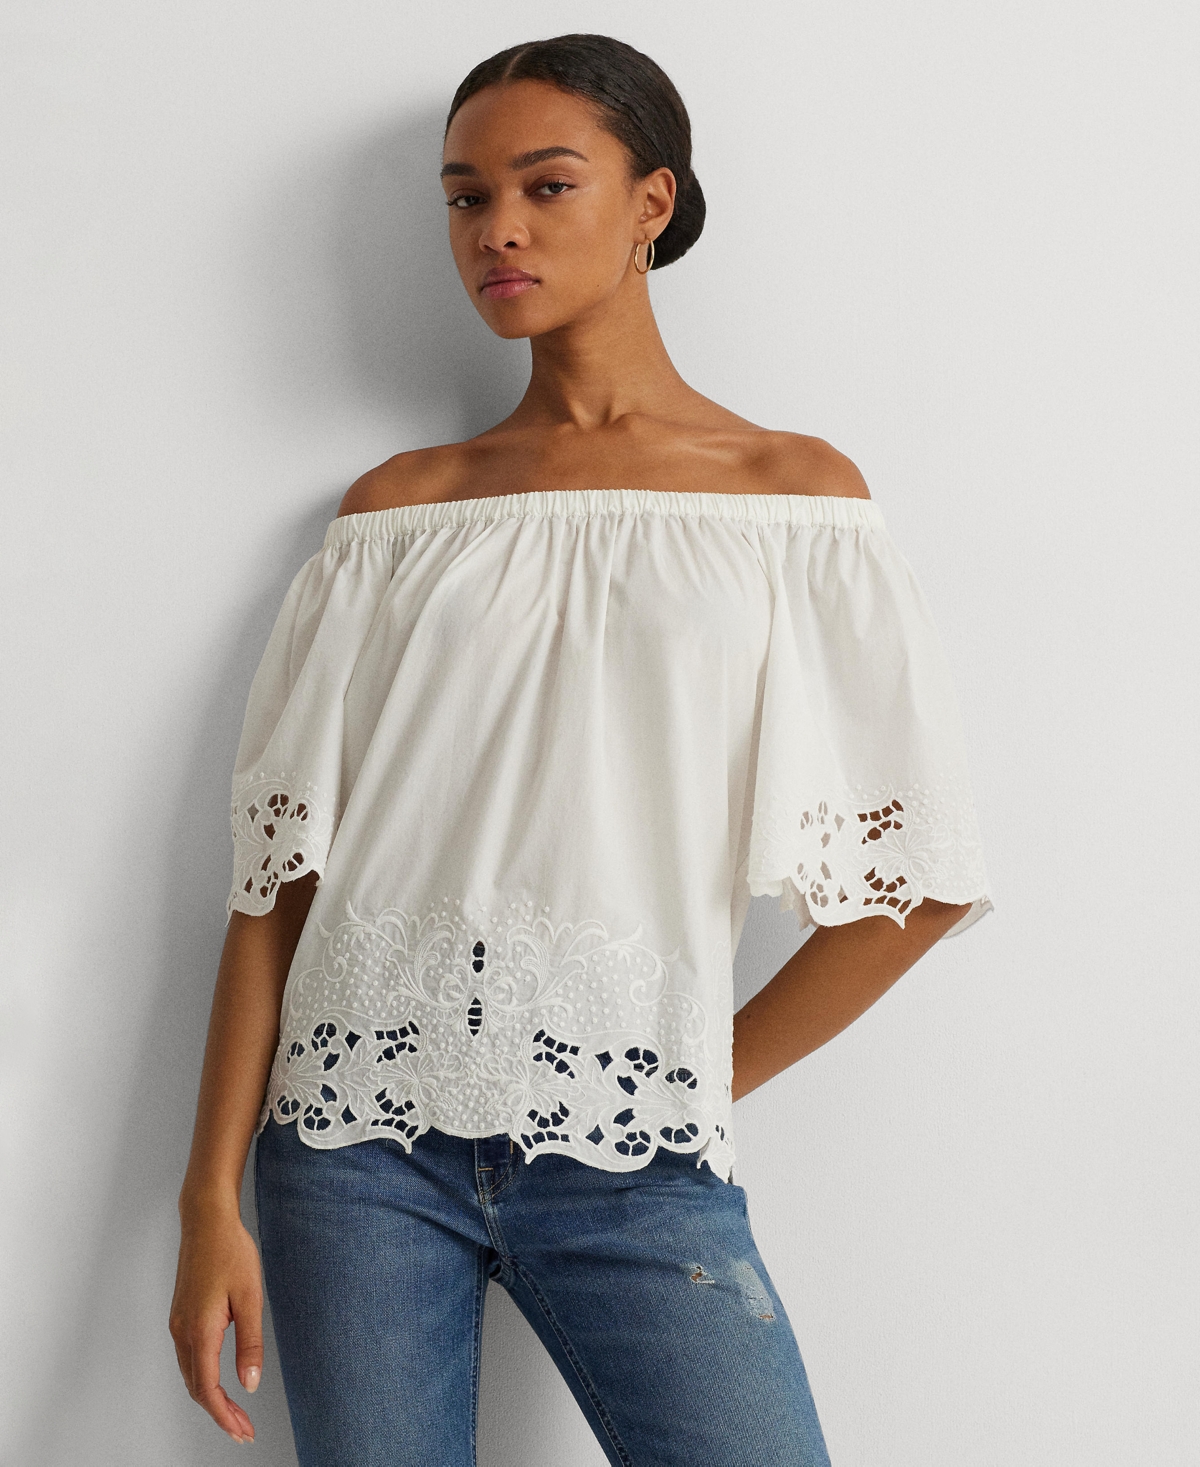 Women's Embroidered Off-The-Shoulder Top - White